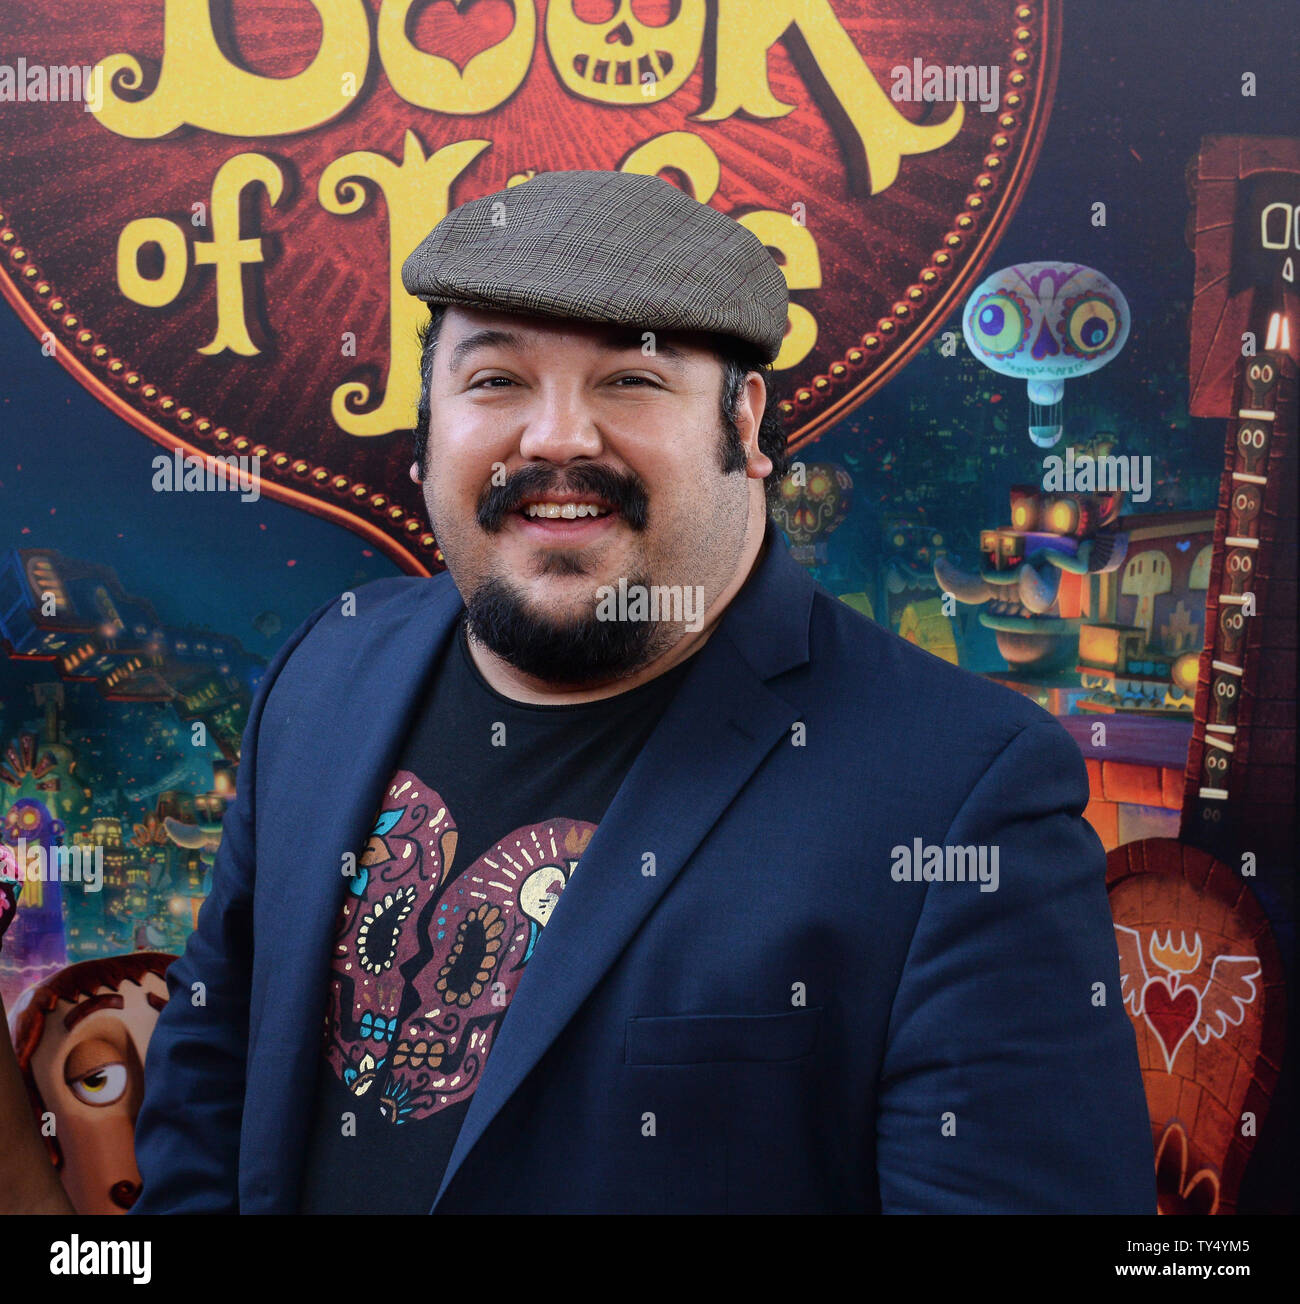 Director Jorge R. Gutierrez attends the premiere of his new animated motion picture romantic comedy "The Book of Life" at Regal Cinemas L.A. Live in Los Angeles on October 12, 2014. Storyline: